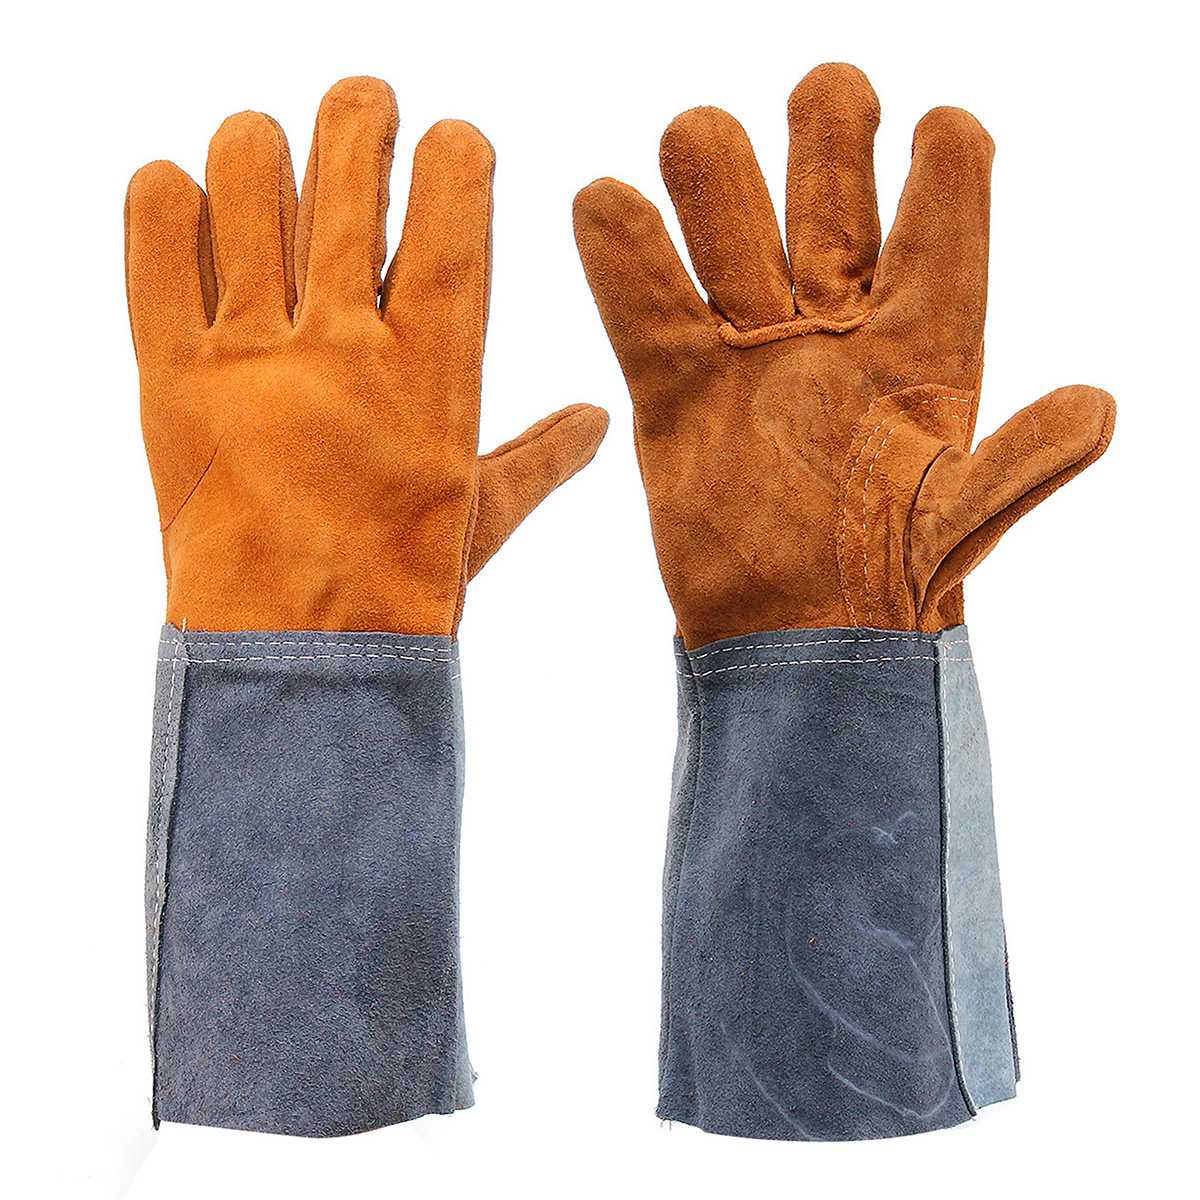 Welding Gloves Protective Thicken Welders Work Soft Palm Cowhide Leather Plus Gloves